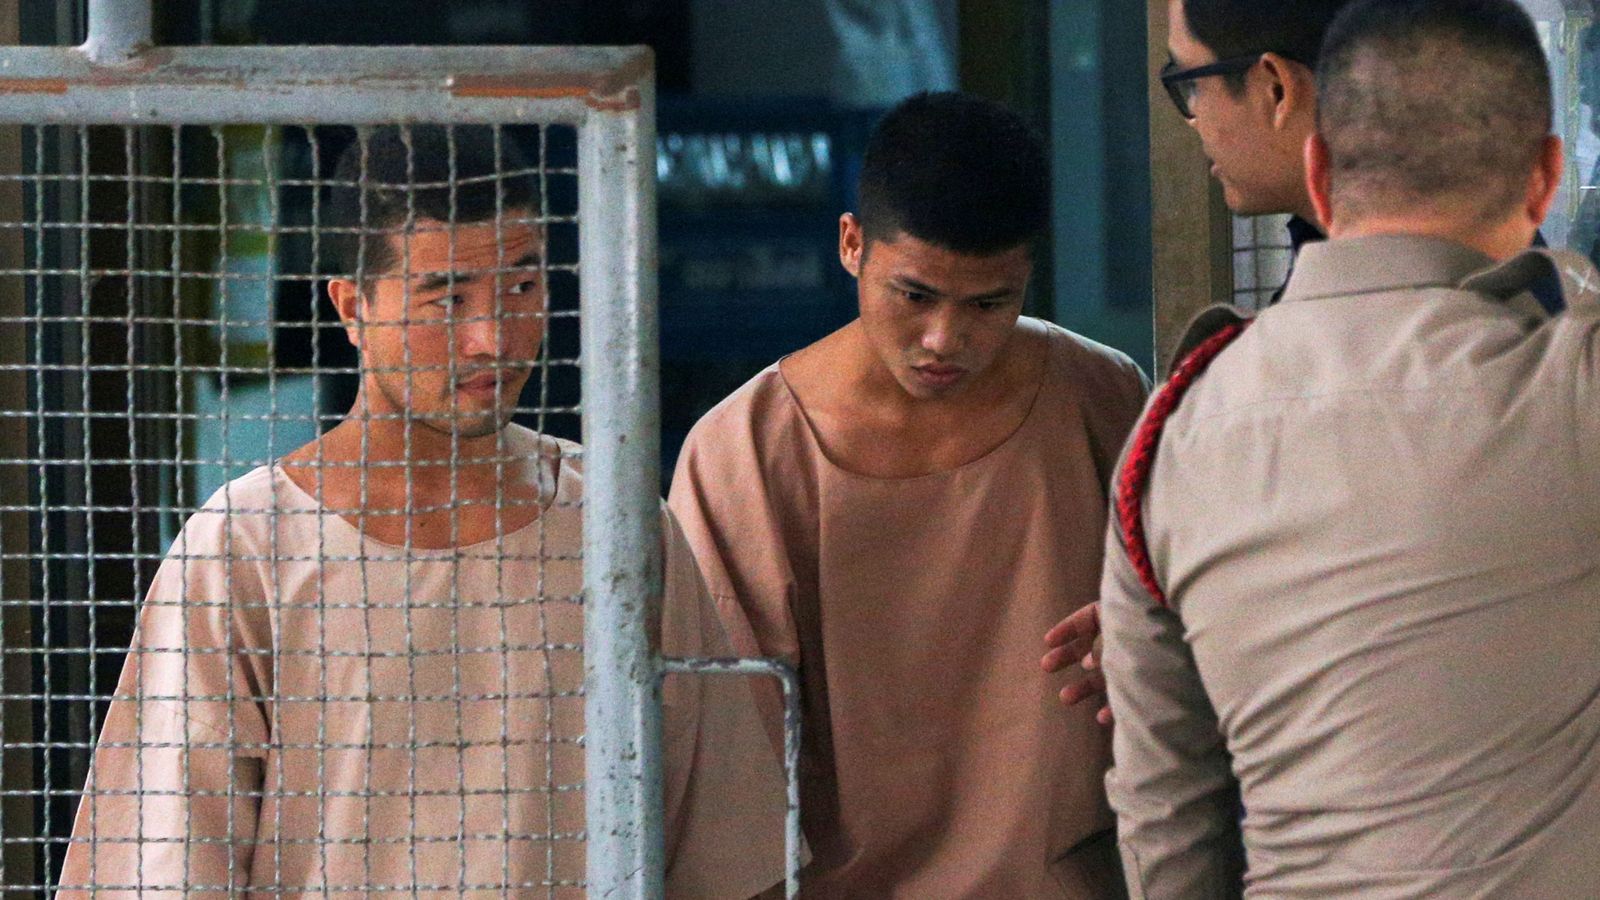 Thailand Court Upholds Death Penalty For Myanmar Men Over